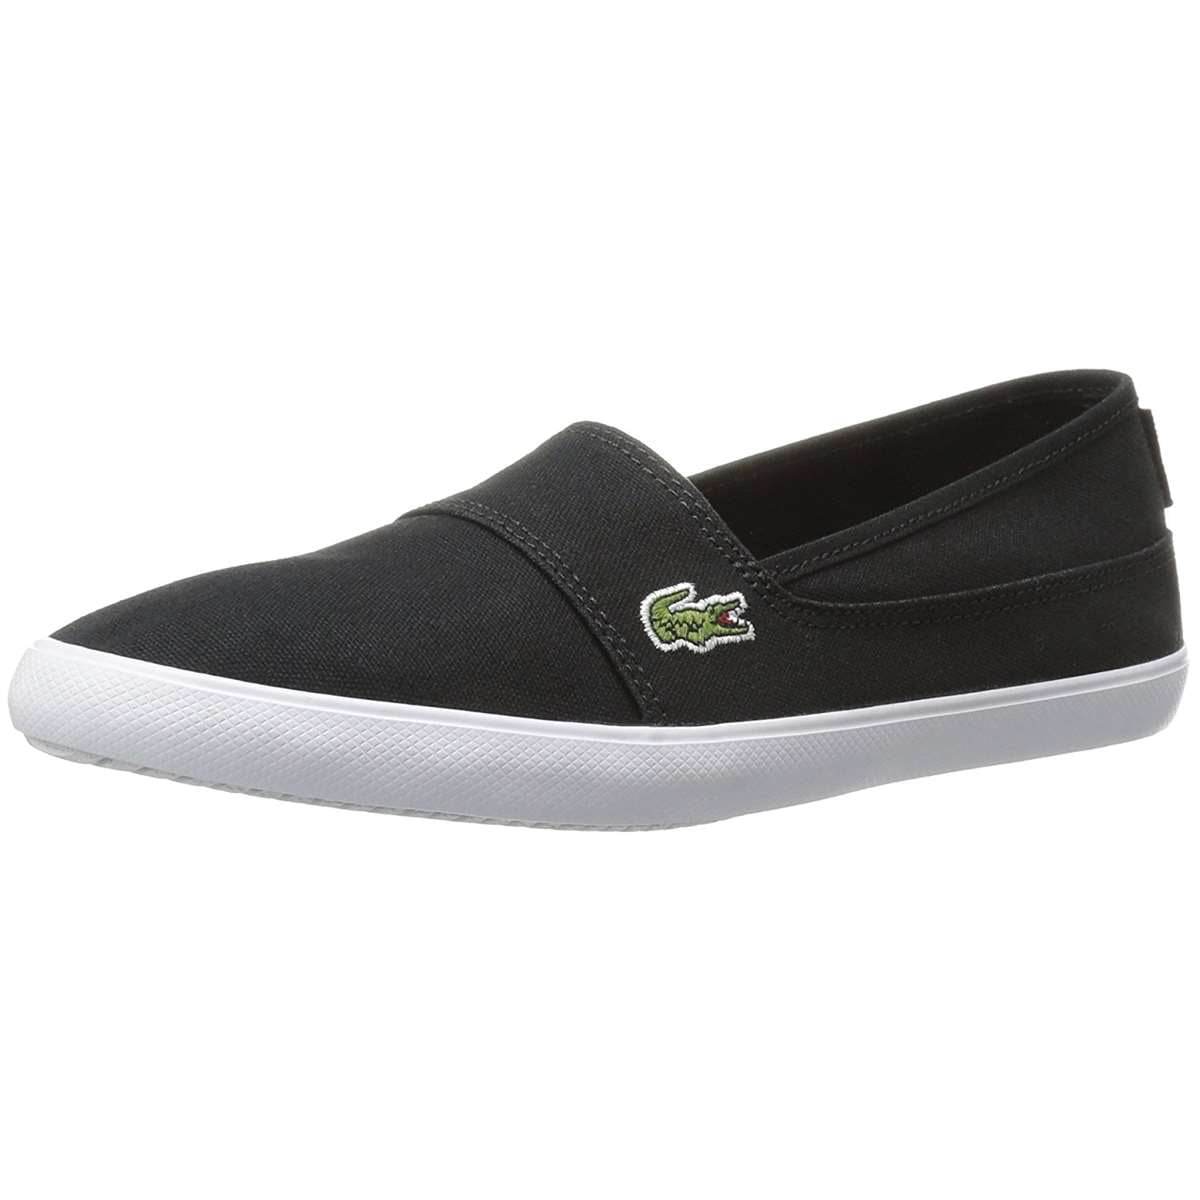 Lacoste Women NEW Marice Series Canvas Fashion Sneakers Slip On Flats Shoes 